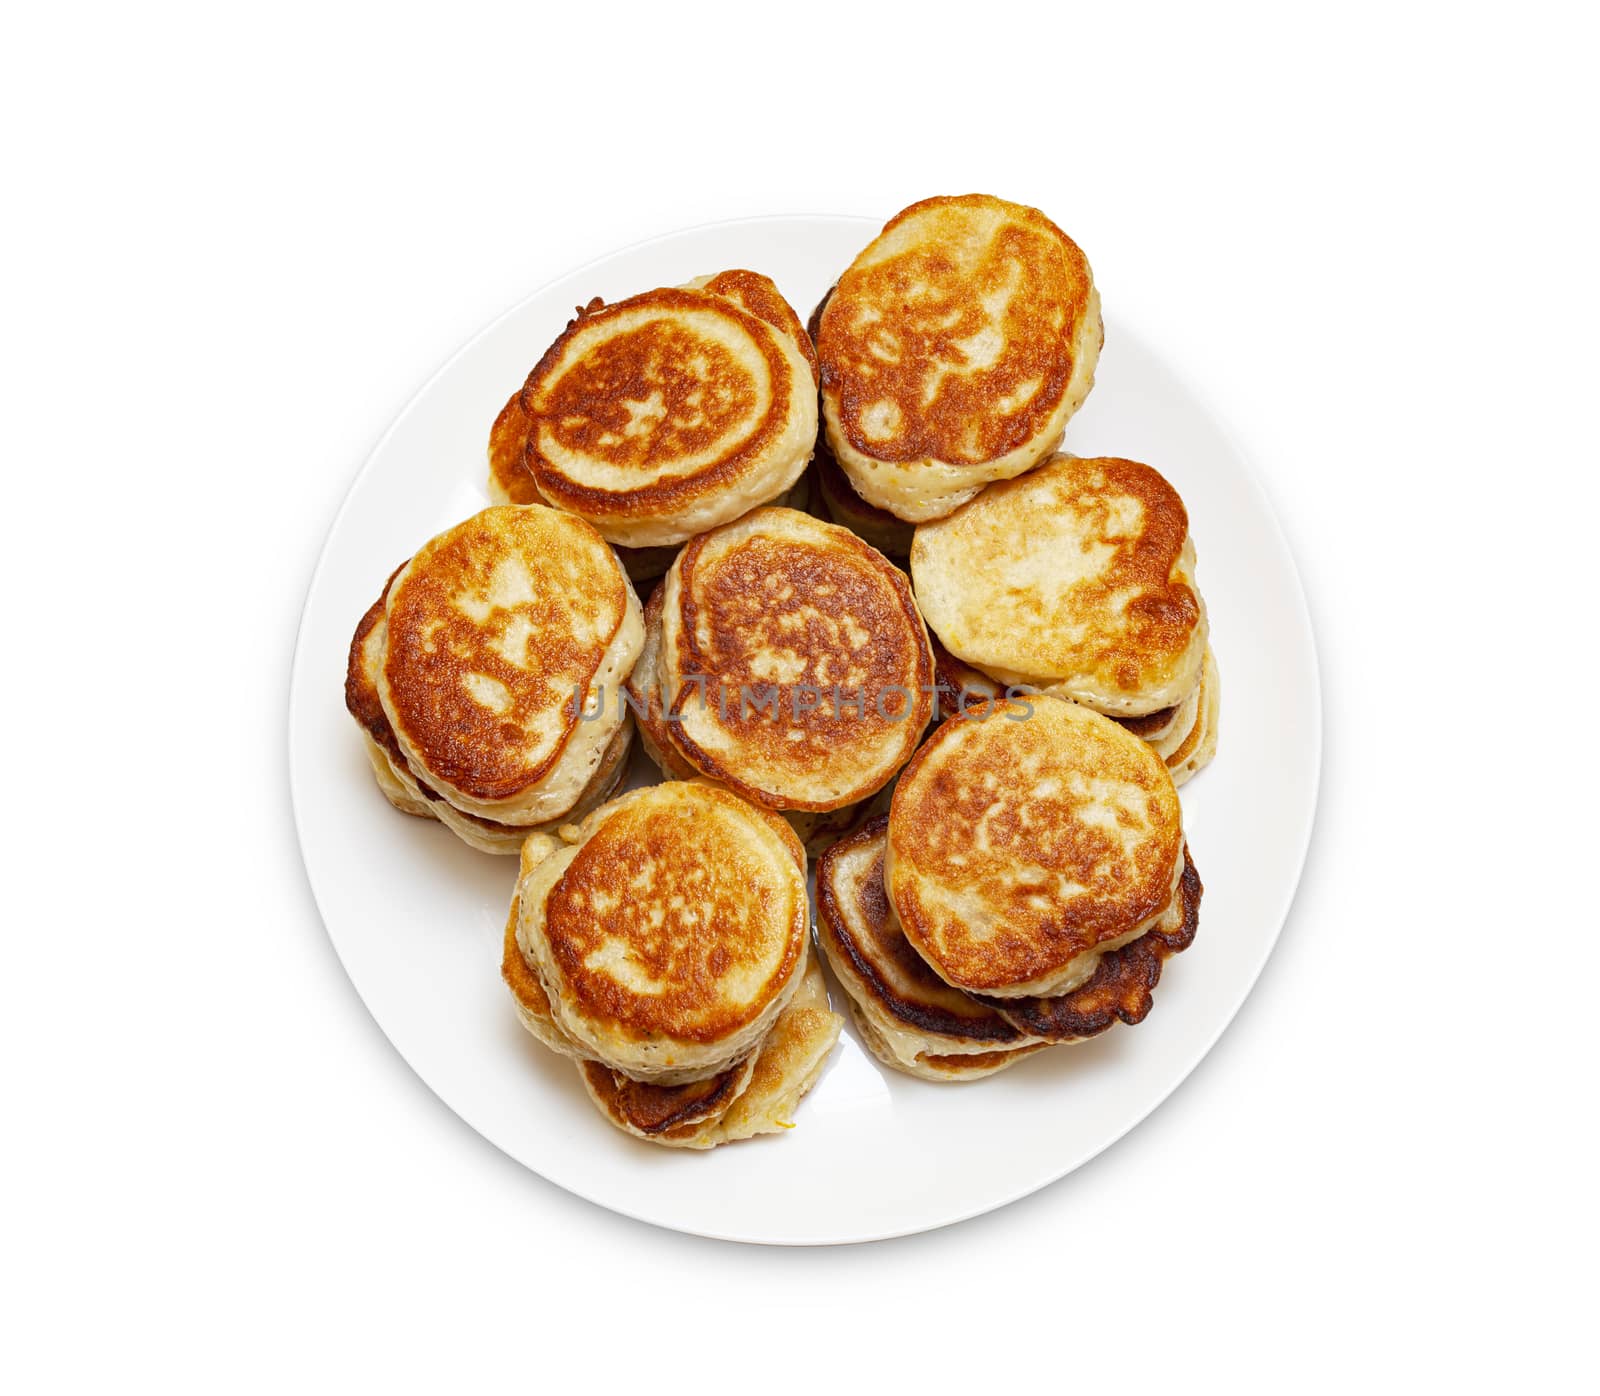 A pile of freshly baked pancakes lay on a plate isolated on whit by SlayCer